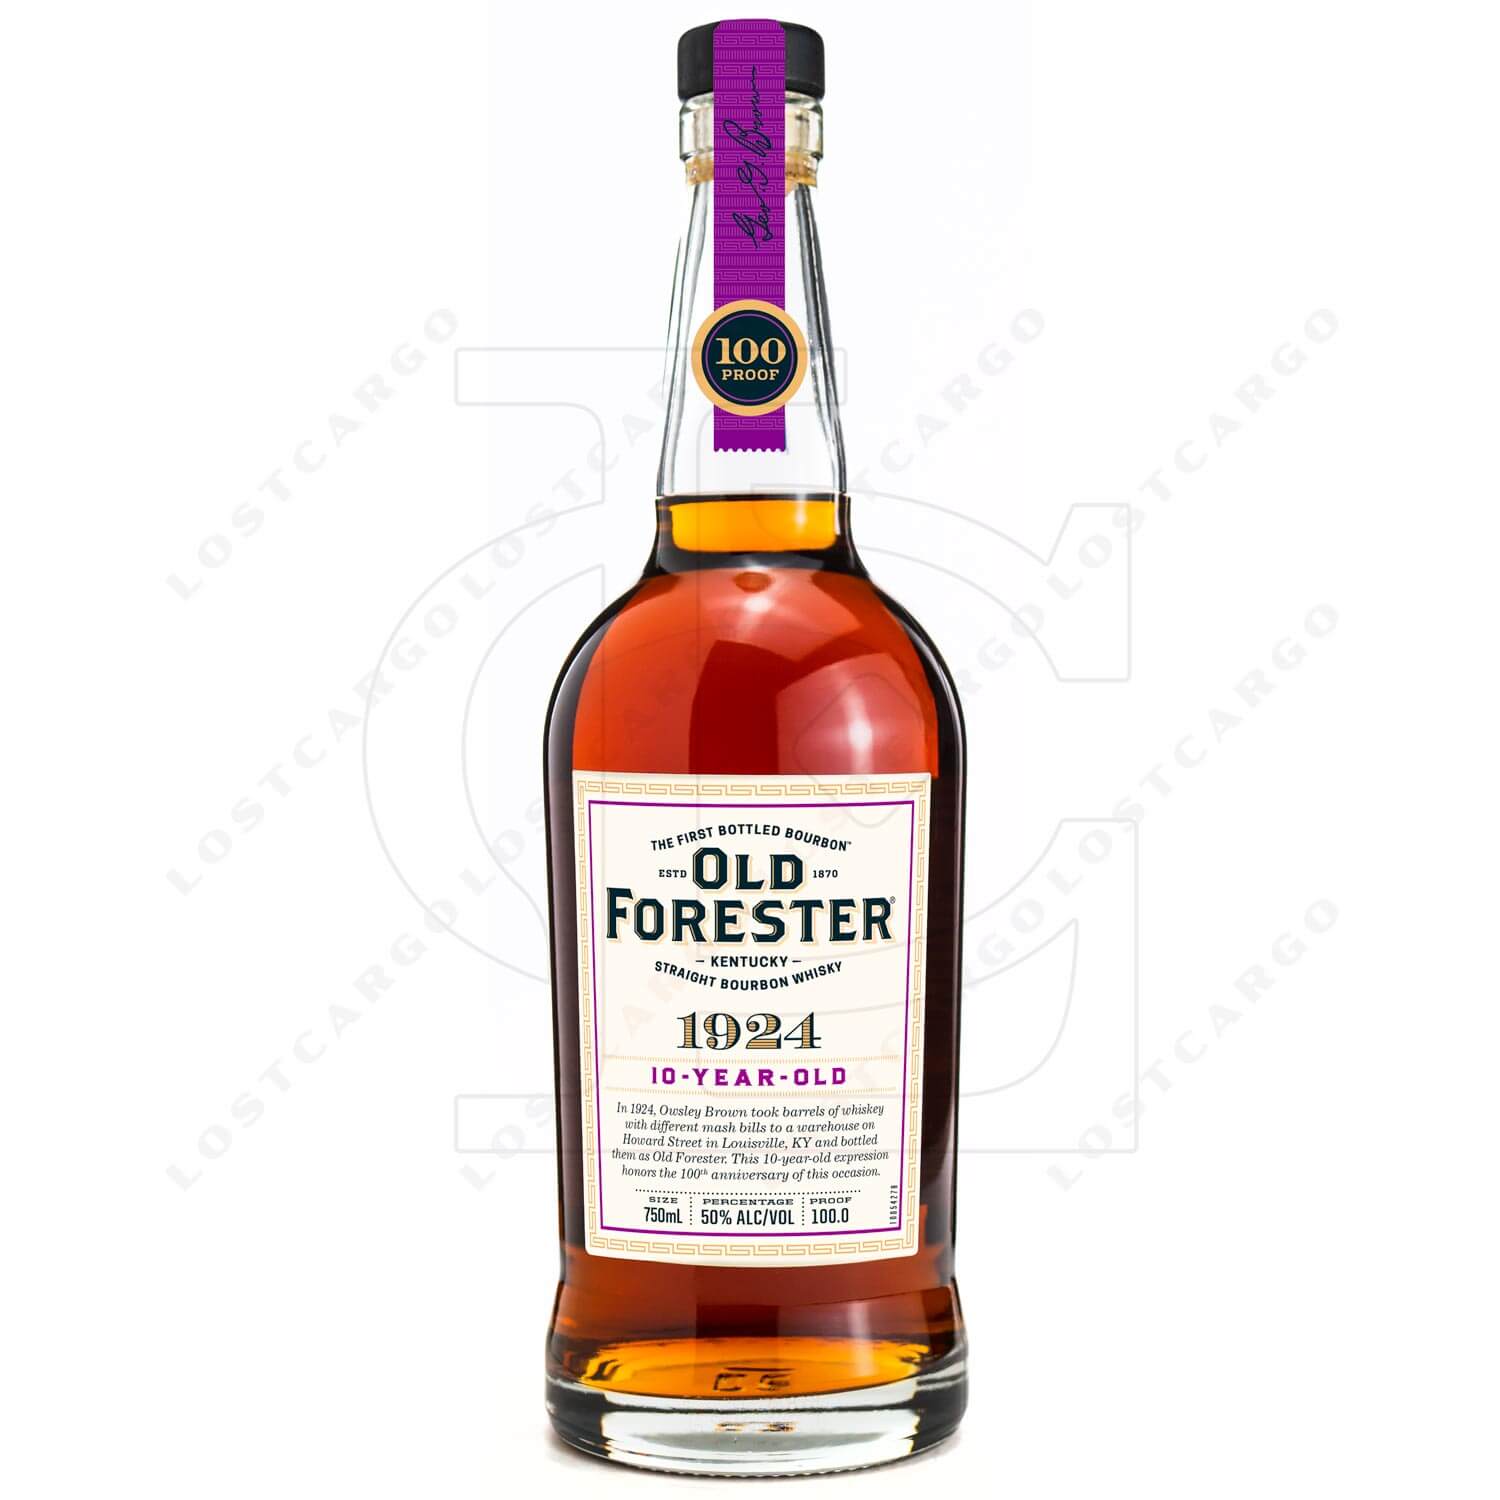 Old Forester 1924 10 Year Old bottle